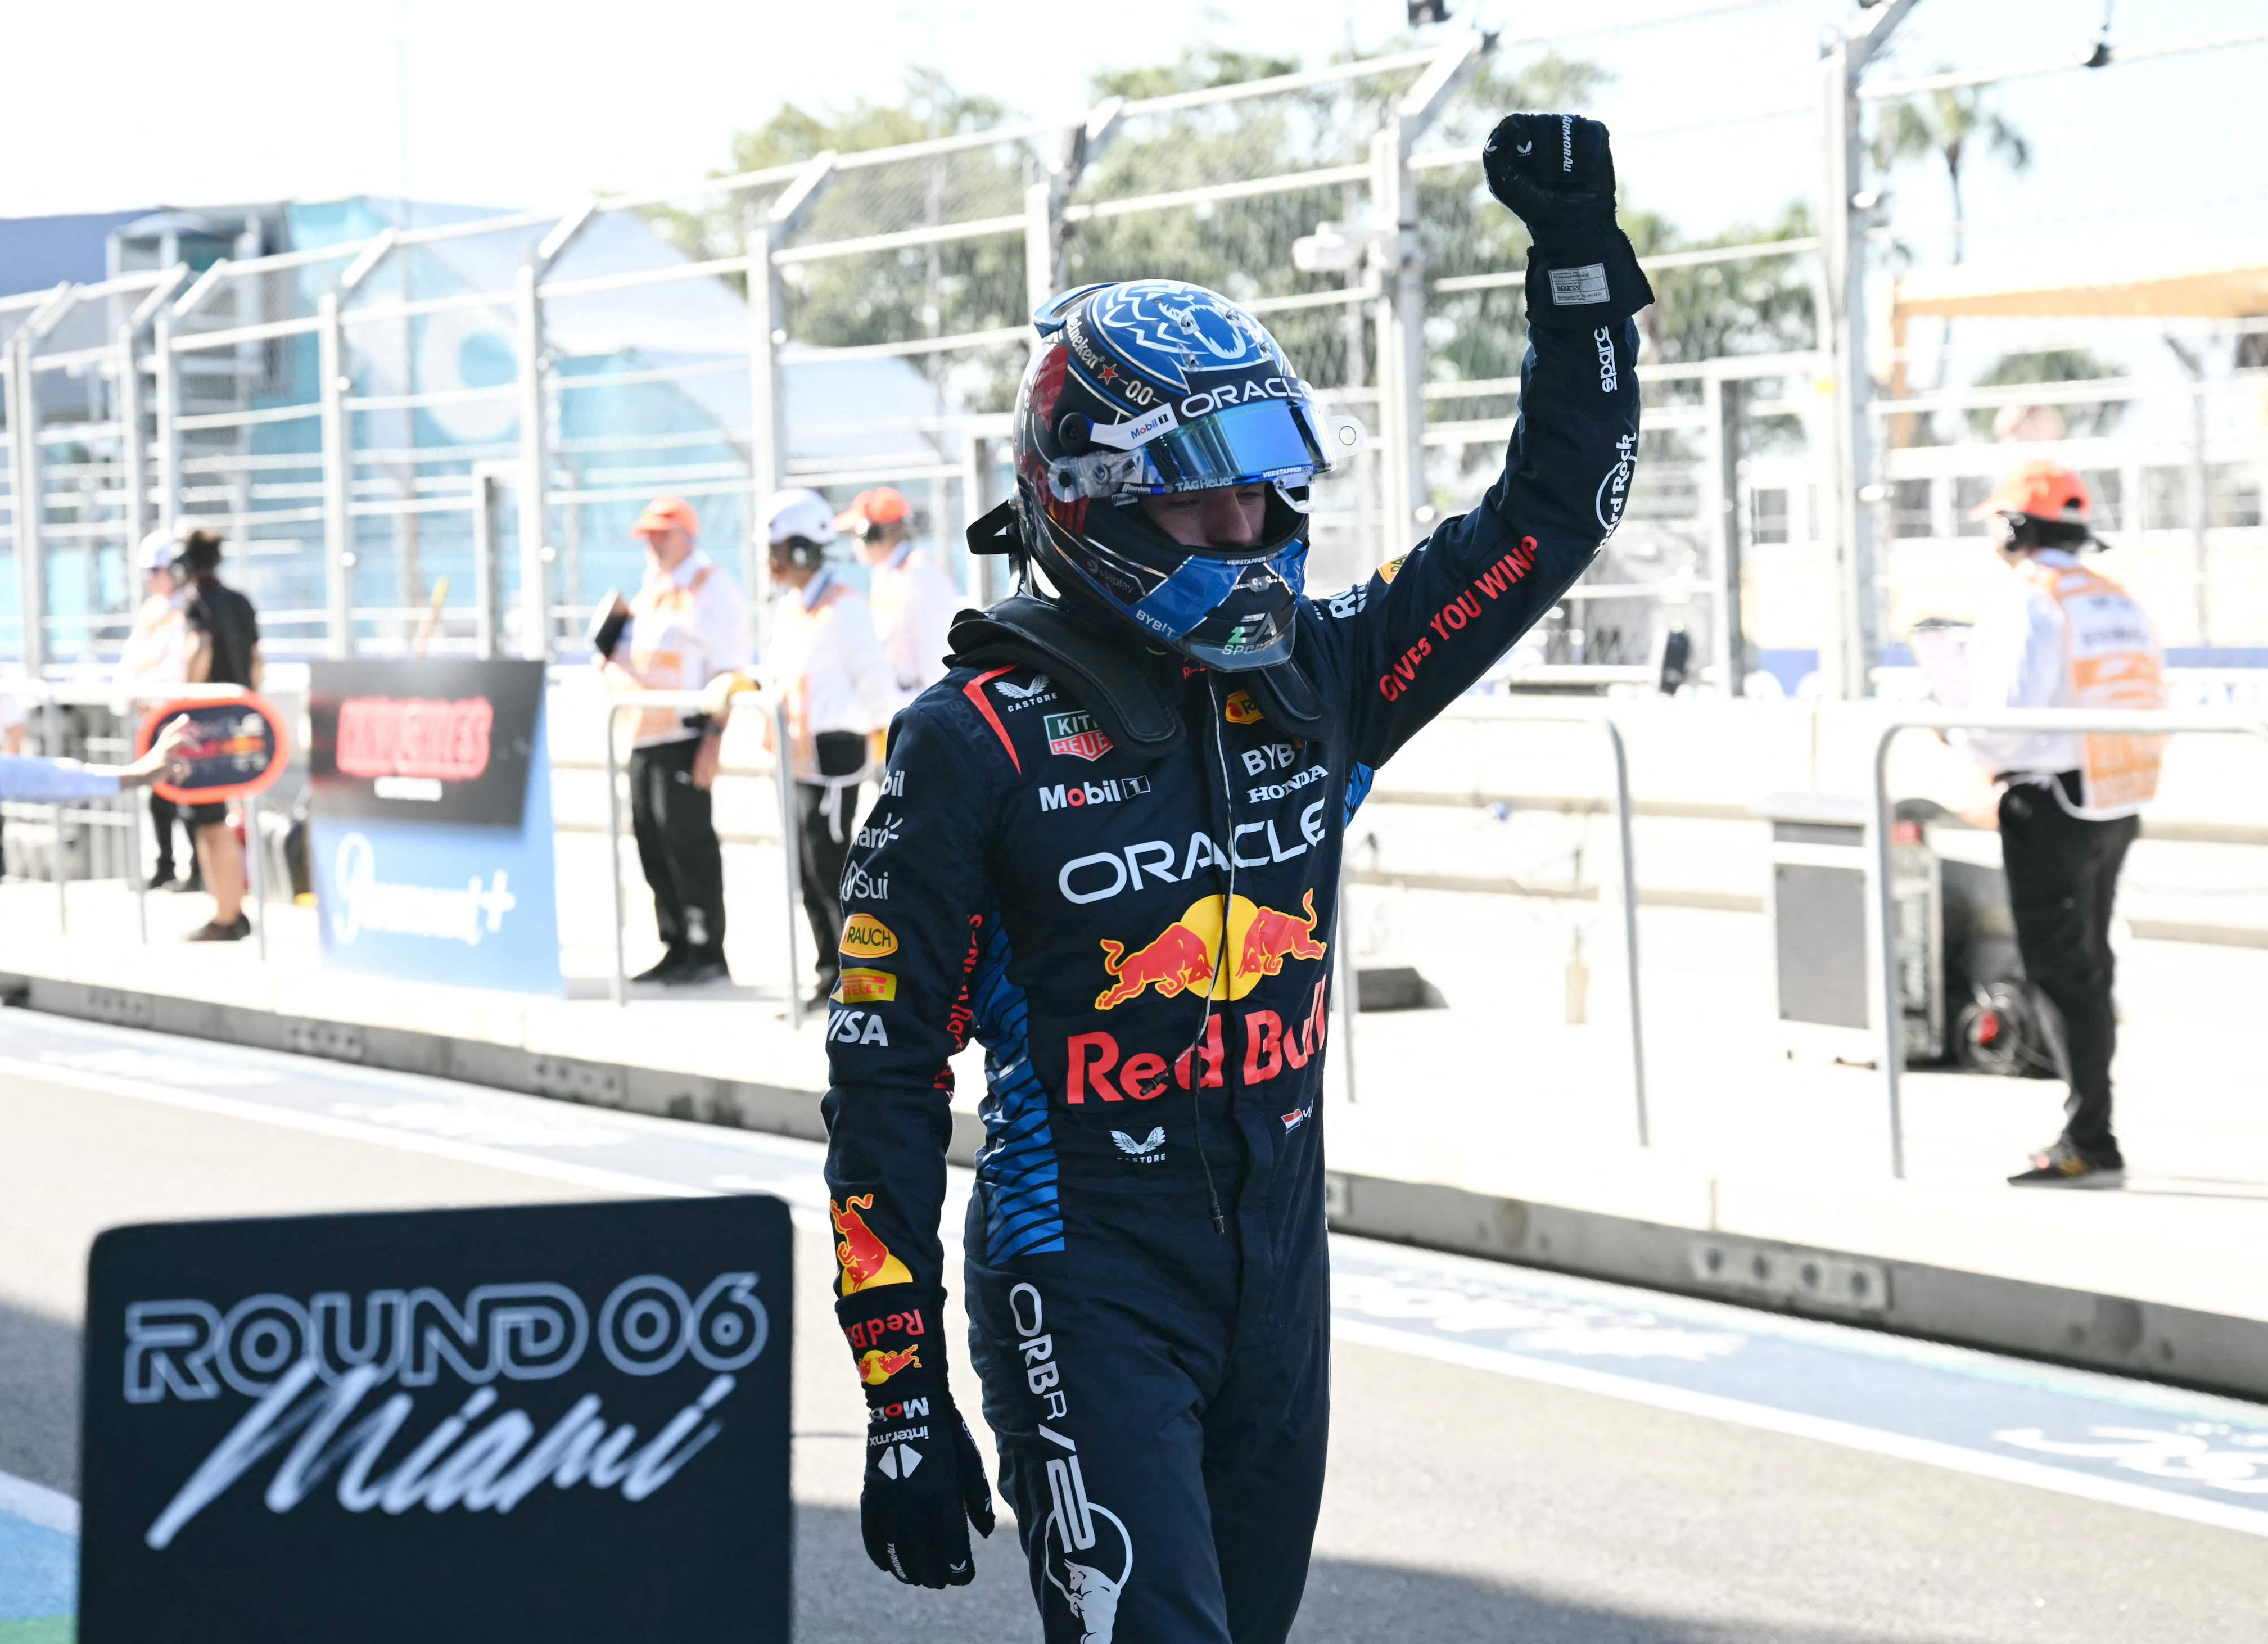 verstappen claims sprint victory and miami gp pole despite 'extremely difficult' lap